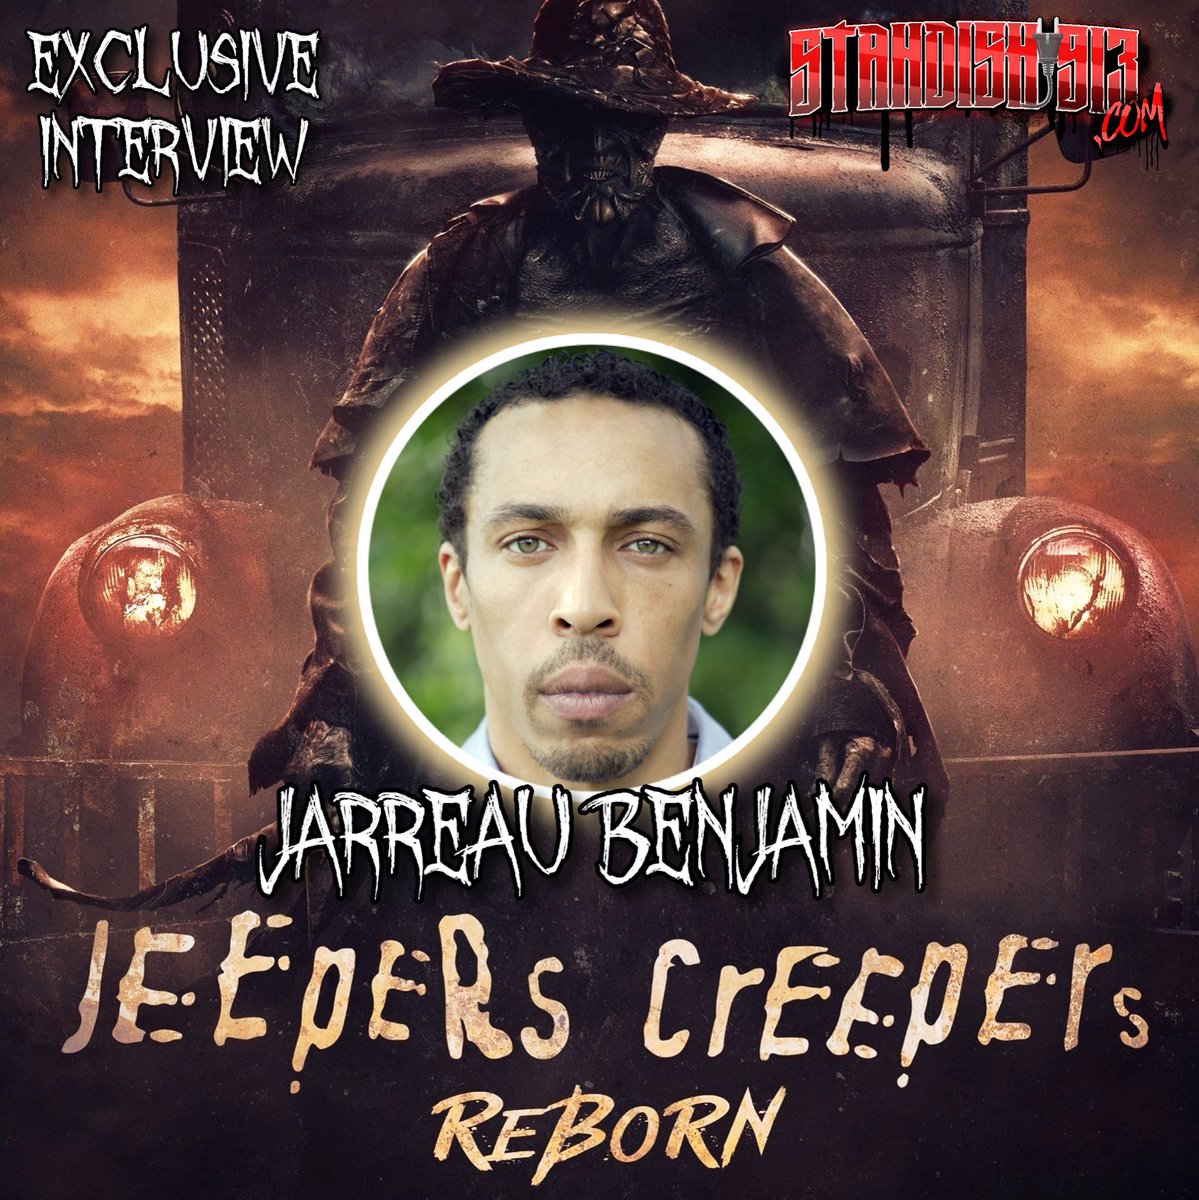 🆕 @STANDISH913COM EXCLUSIVE INTERVIEW: @JarreauBenjamin AKA 'Creeper' From '#JeepersCreeperREBORN' OUT NOW! 🦇 standish913.com/2023/10/exclus…